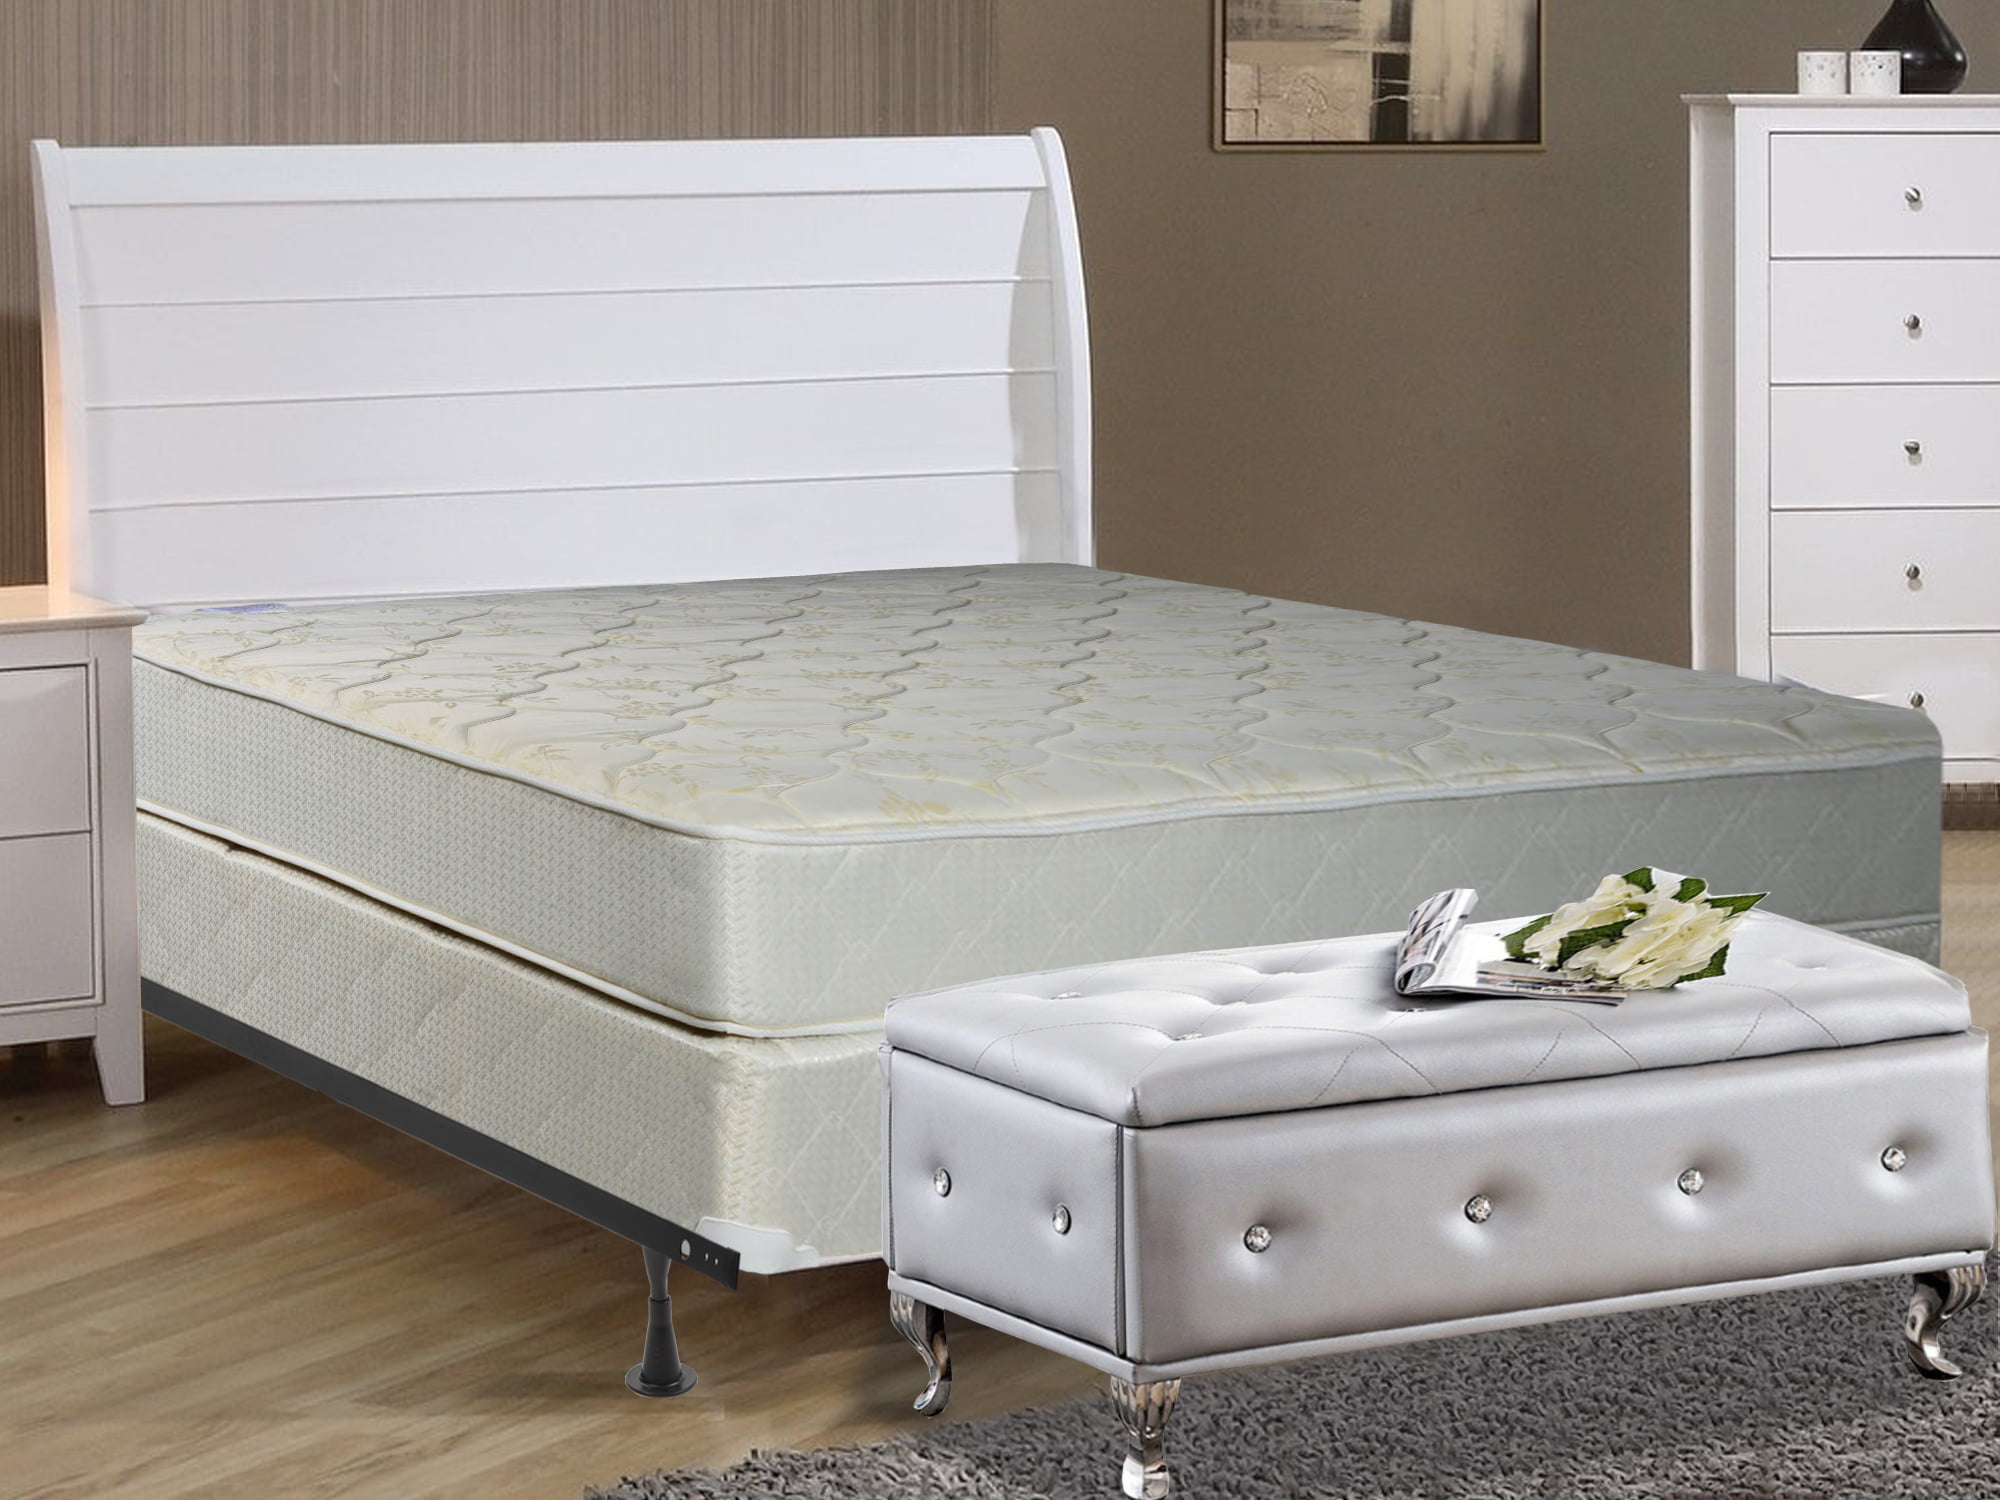 queen size mattress on full size box spring